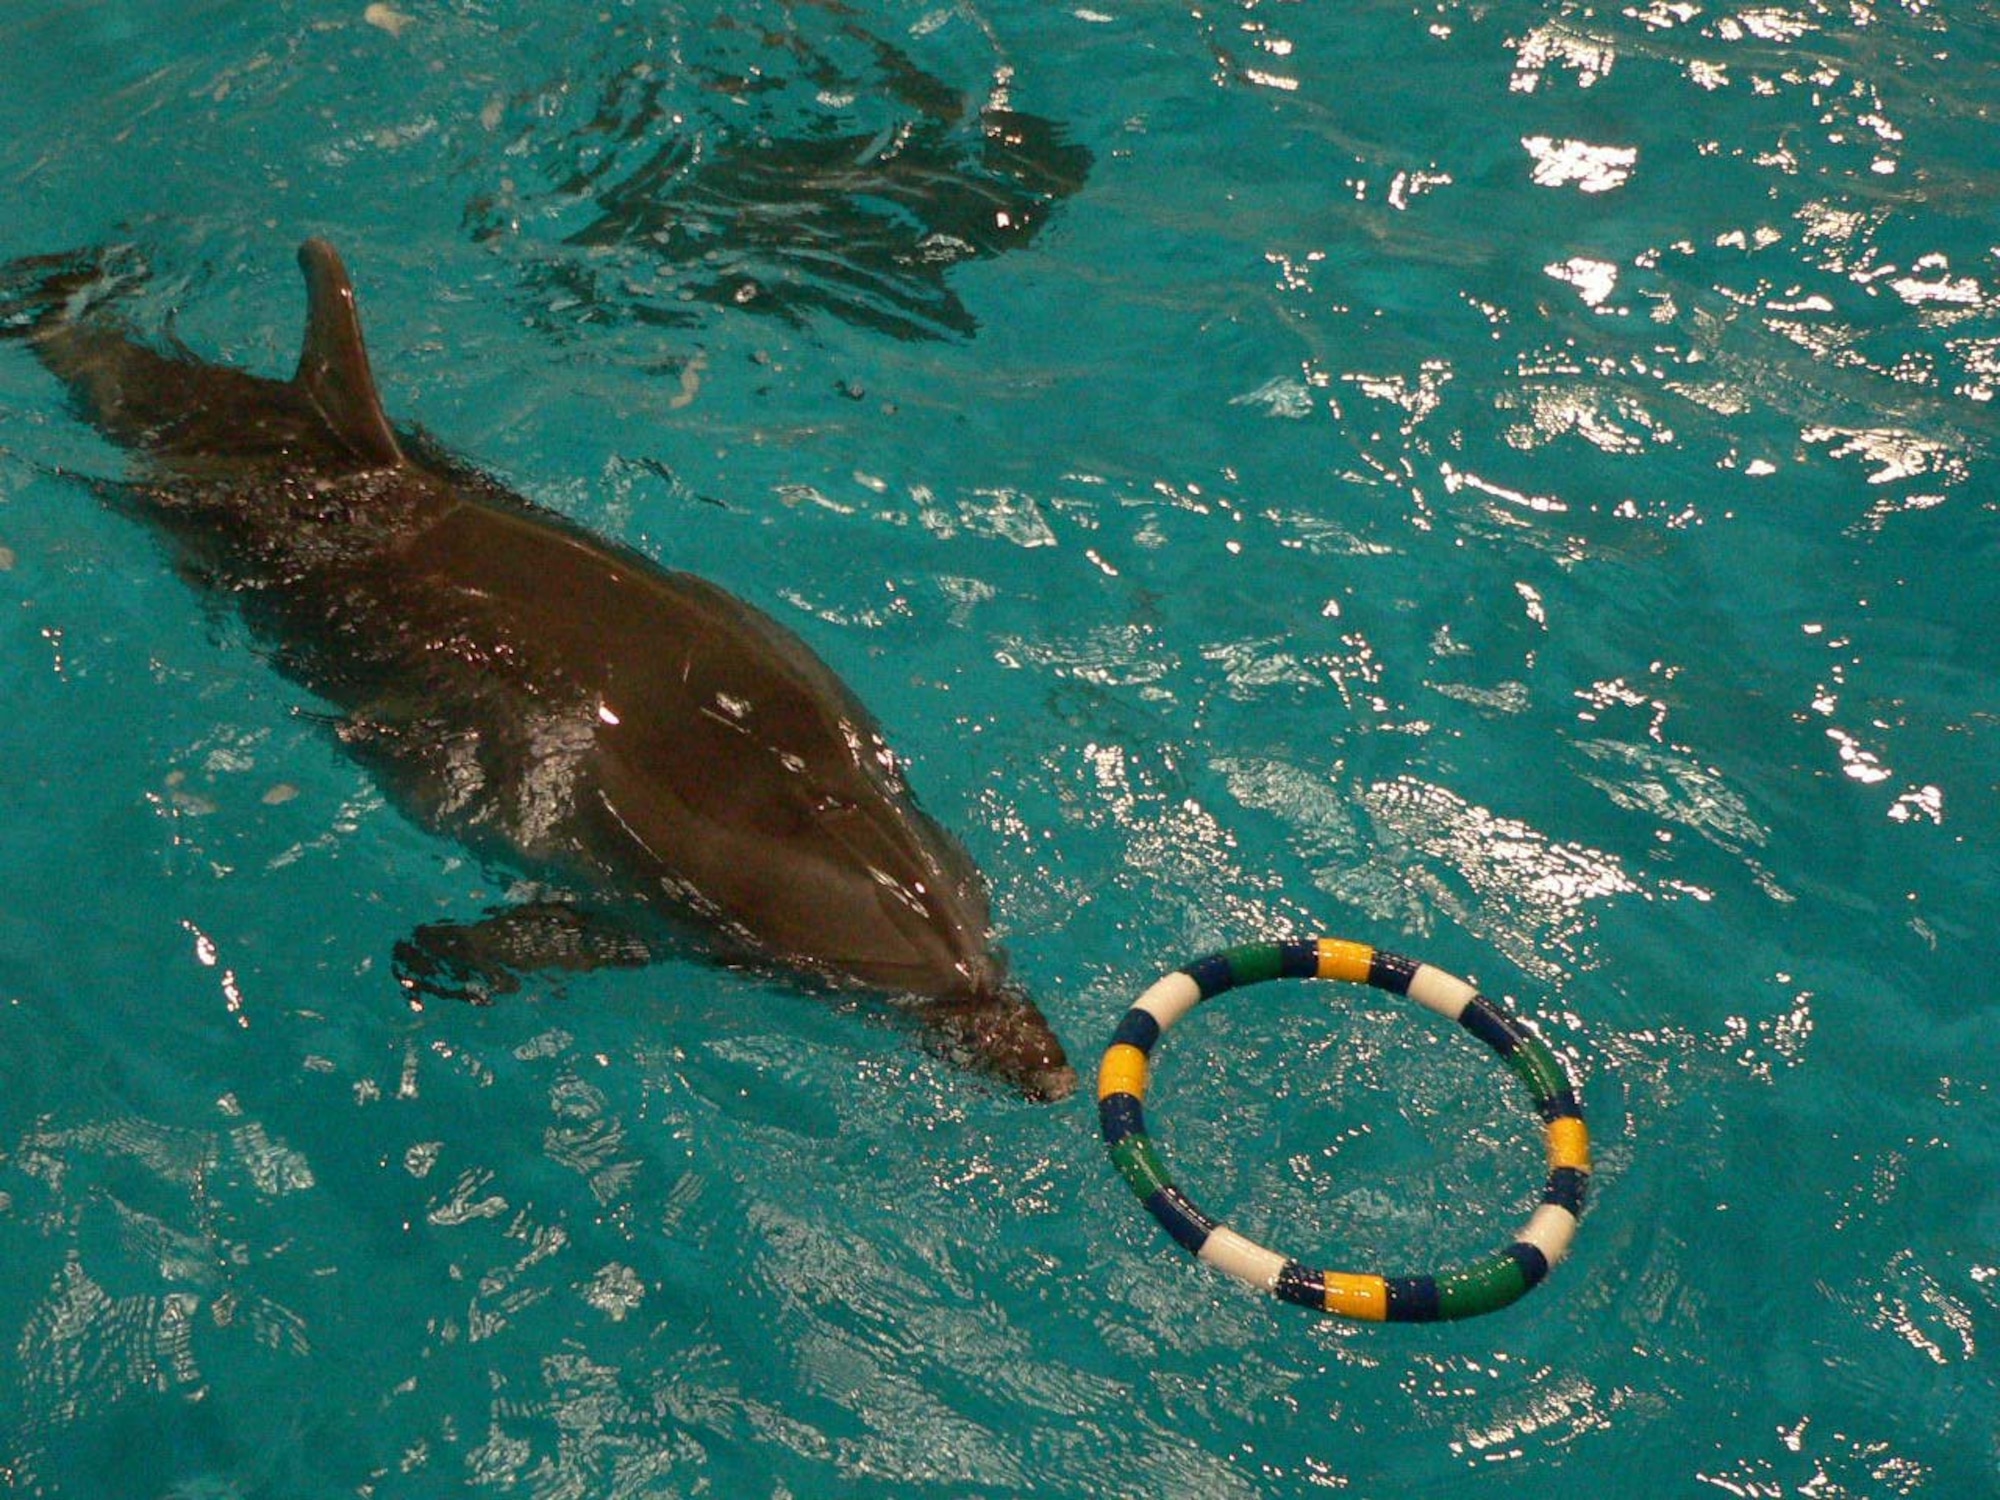 070306 -- AOMORI, Japan -- A bottle-nosed dolphin plays with a ringlet after a 30-minute live show performance at the Aquarium Asamushi. The dolphin show is the one of the main attractions at the aquarium. The aquarium is approximately 90 minutes by car or bus from Misawa Air Base, Japan. (U.S. Air Force photo by Staff Sgt. A.C. Eggman)